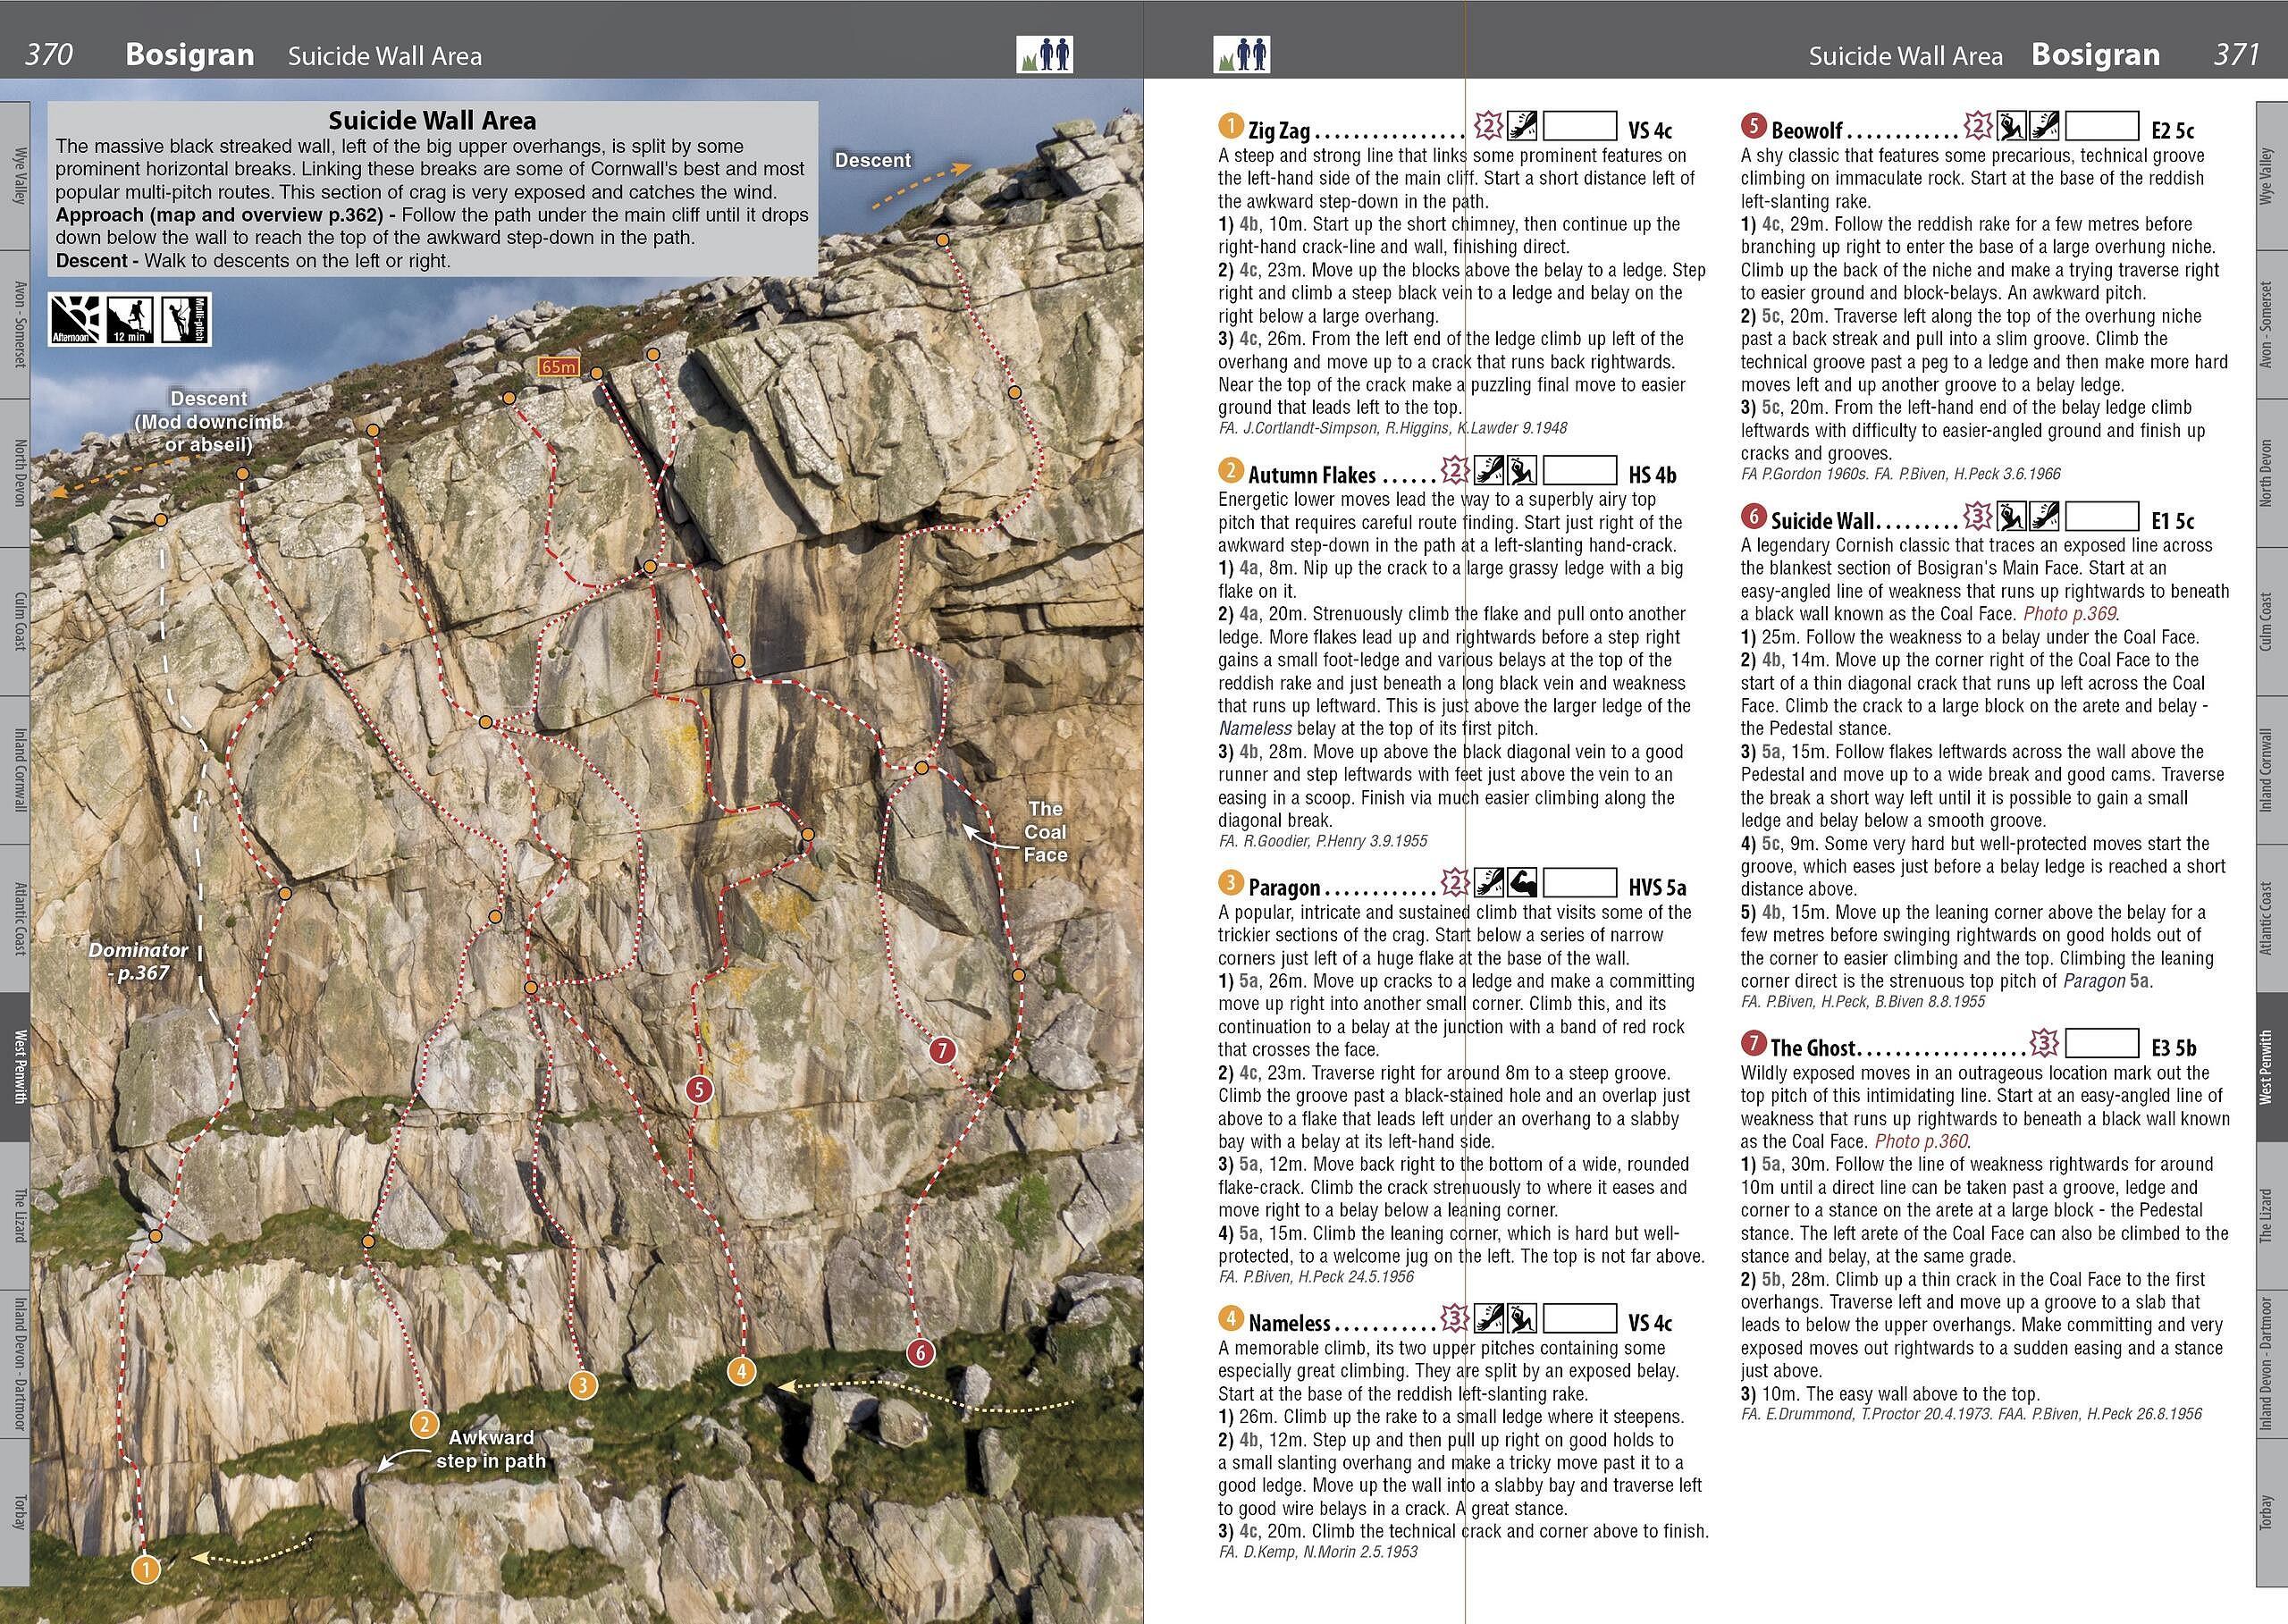 West Country Climbs example page  © Rockfax